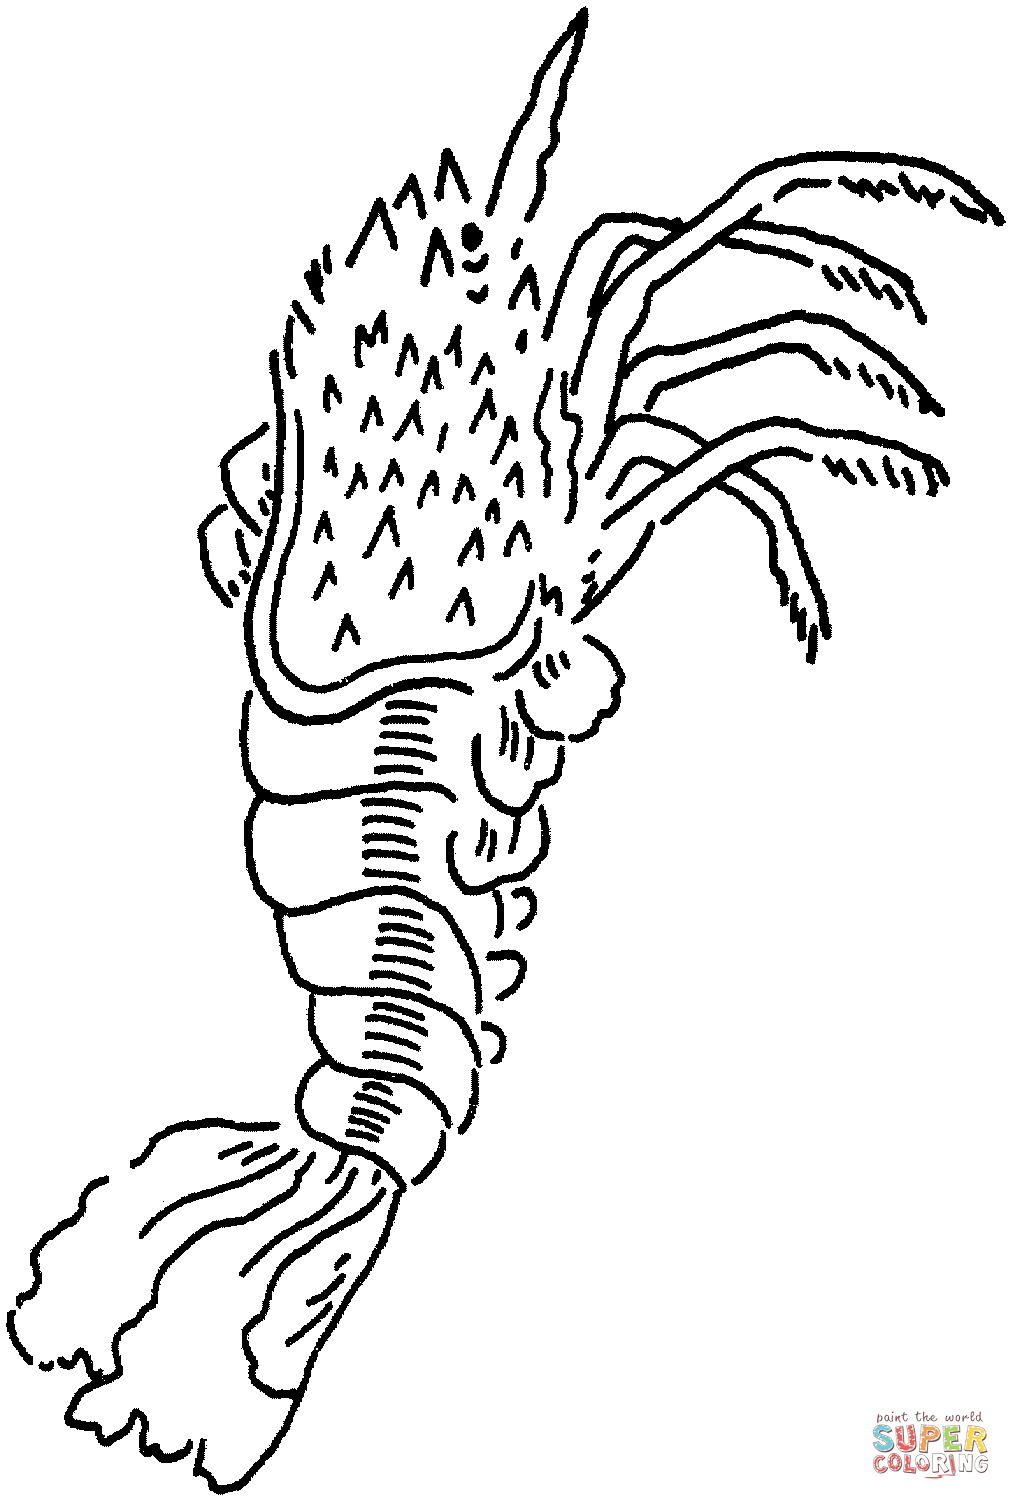 Spiny Lobster coloring #12, Download drawings